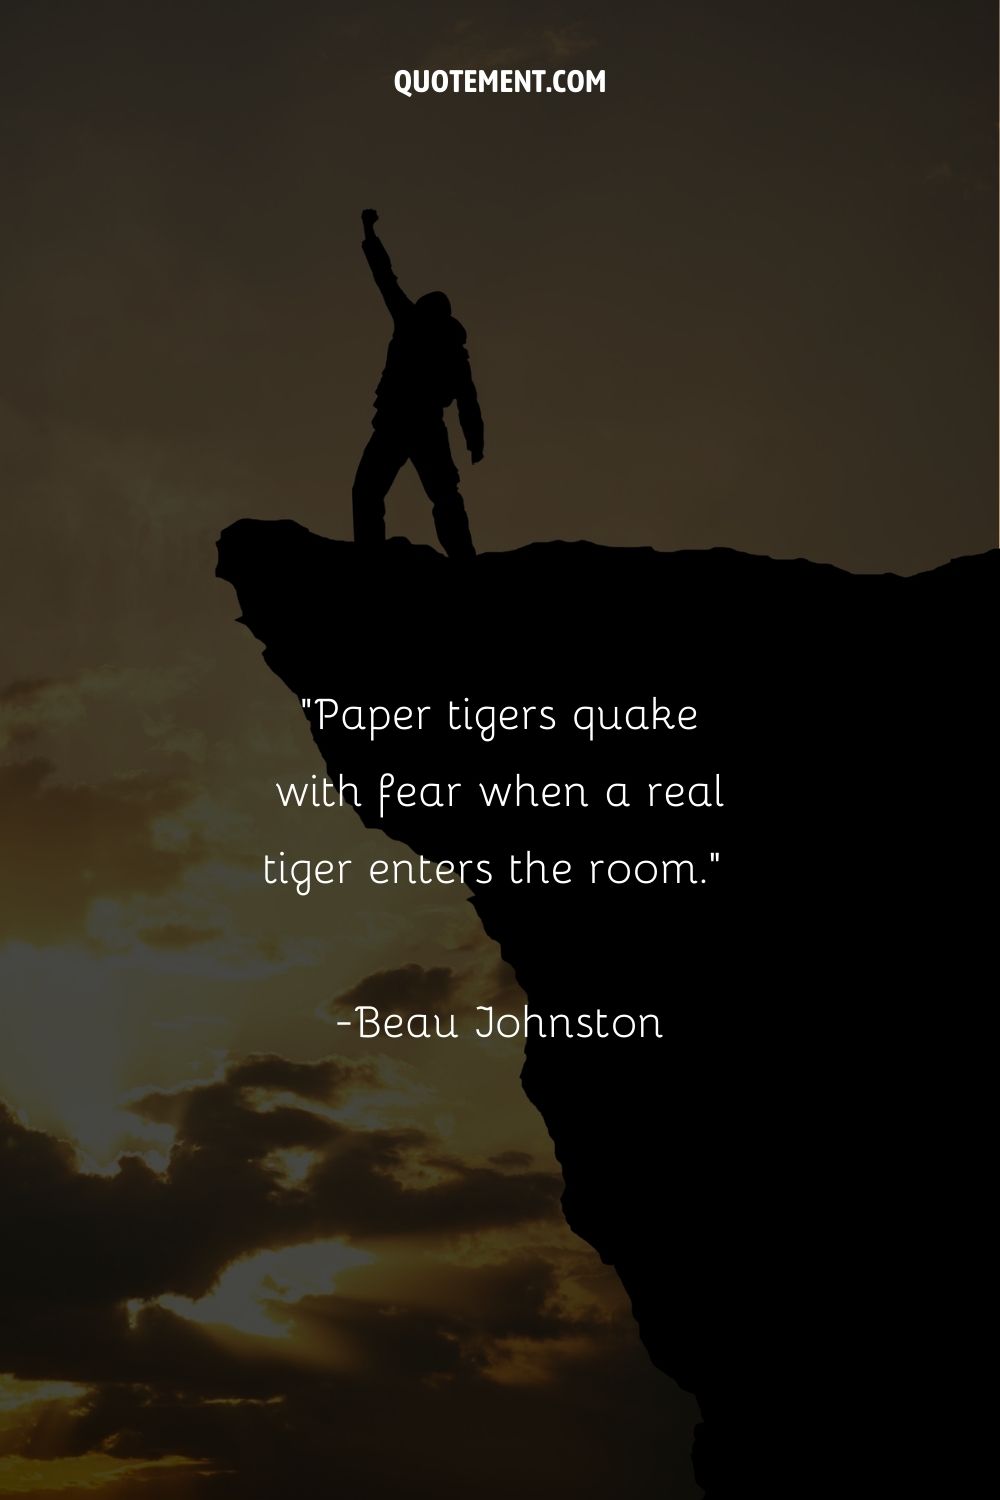 Paper tigers quake with fear when a real tiger enters the room